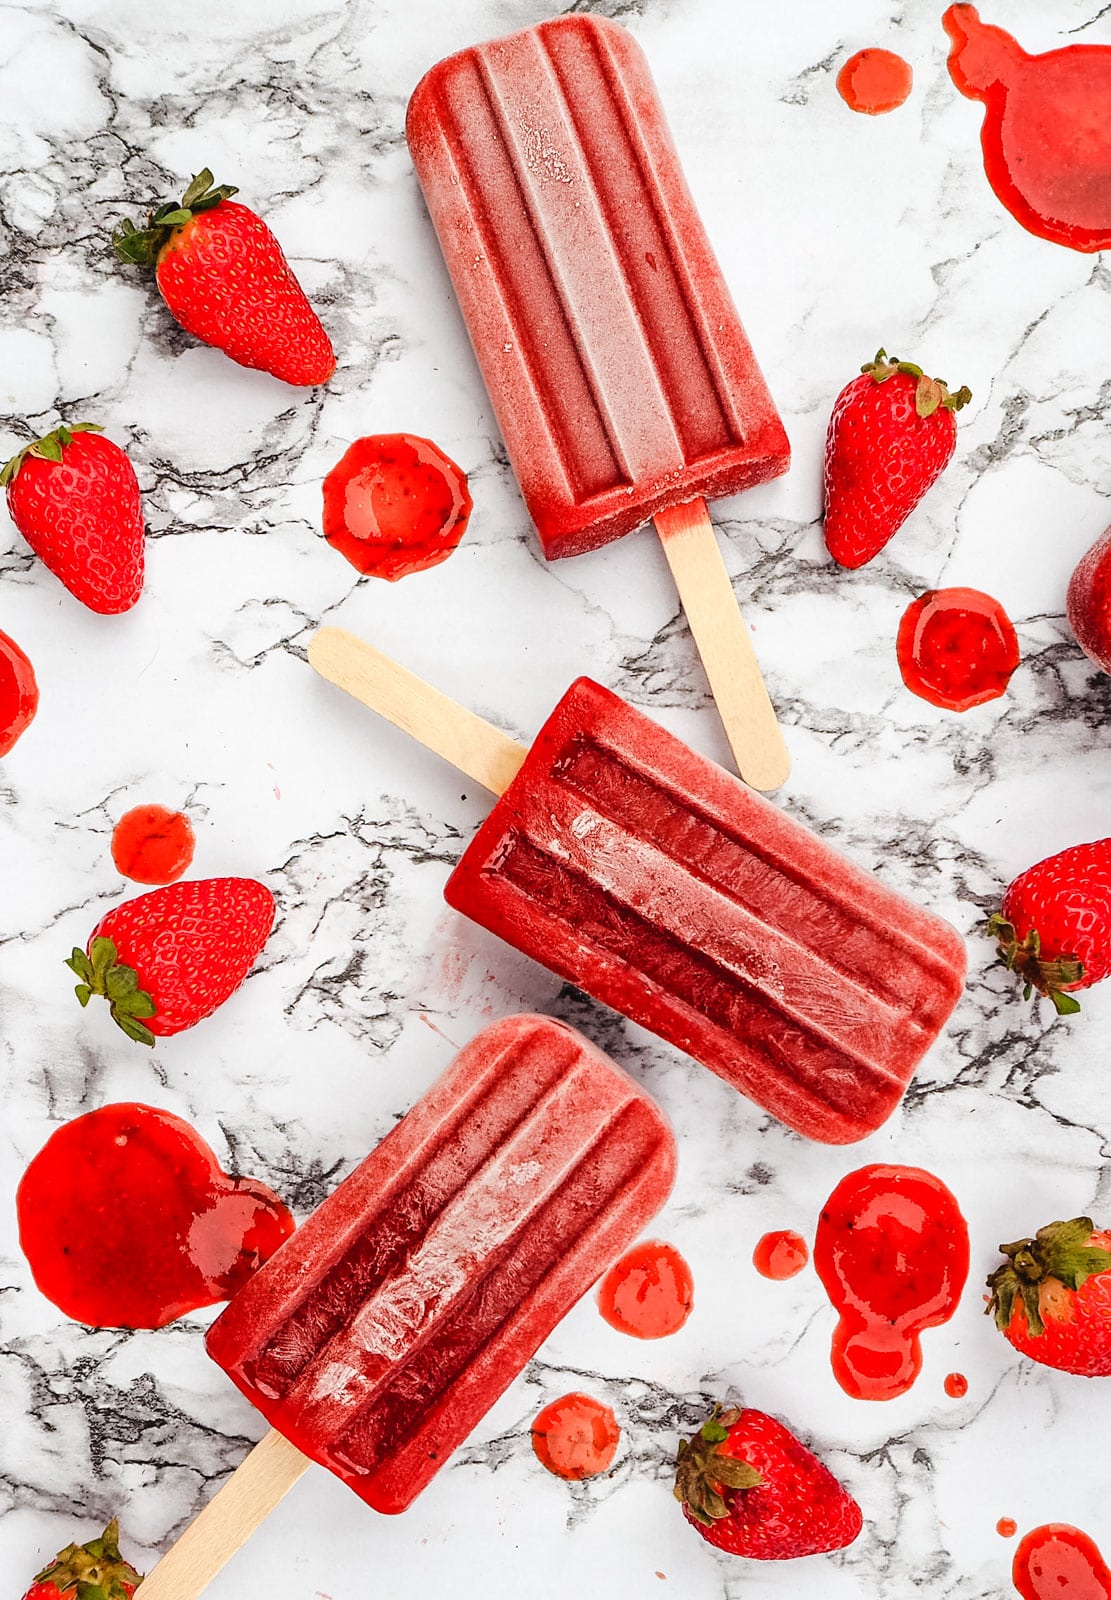 Strawberry balsamic popsicles with fresh strawberries.